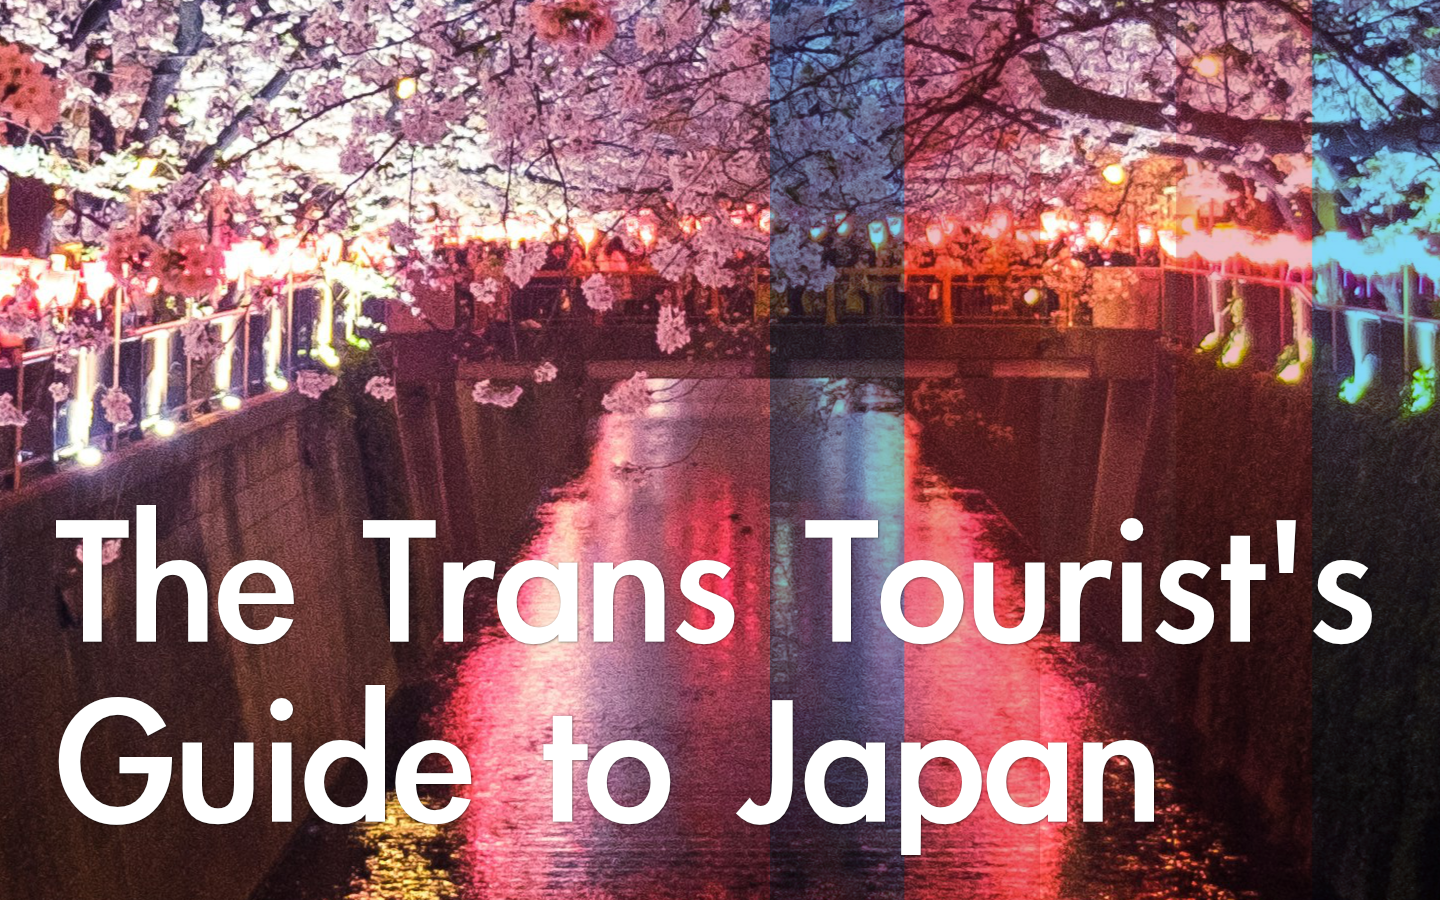 The Trans Tourist's Guide to Japan. Image by Sora Sagano on Unsplash.